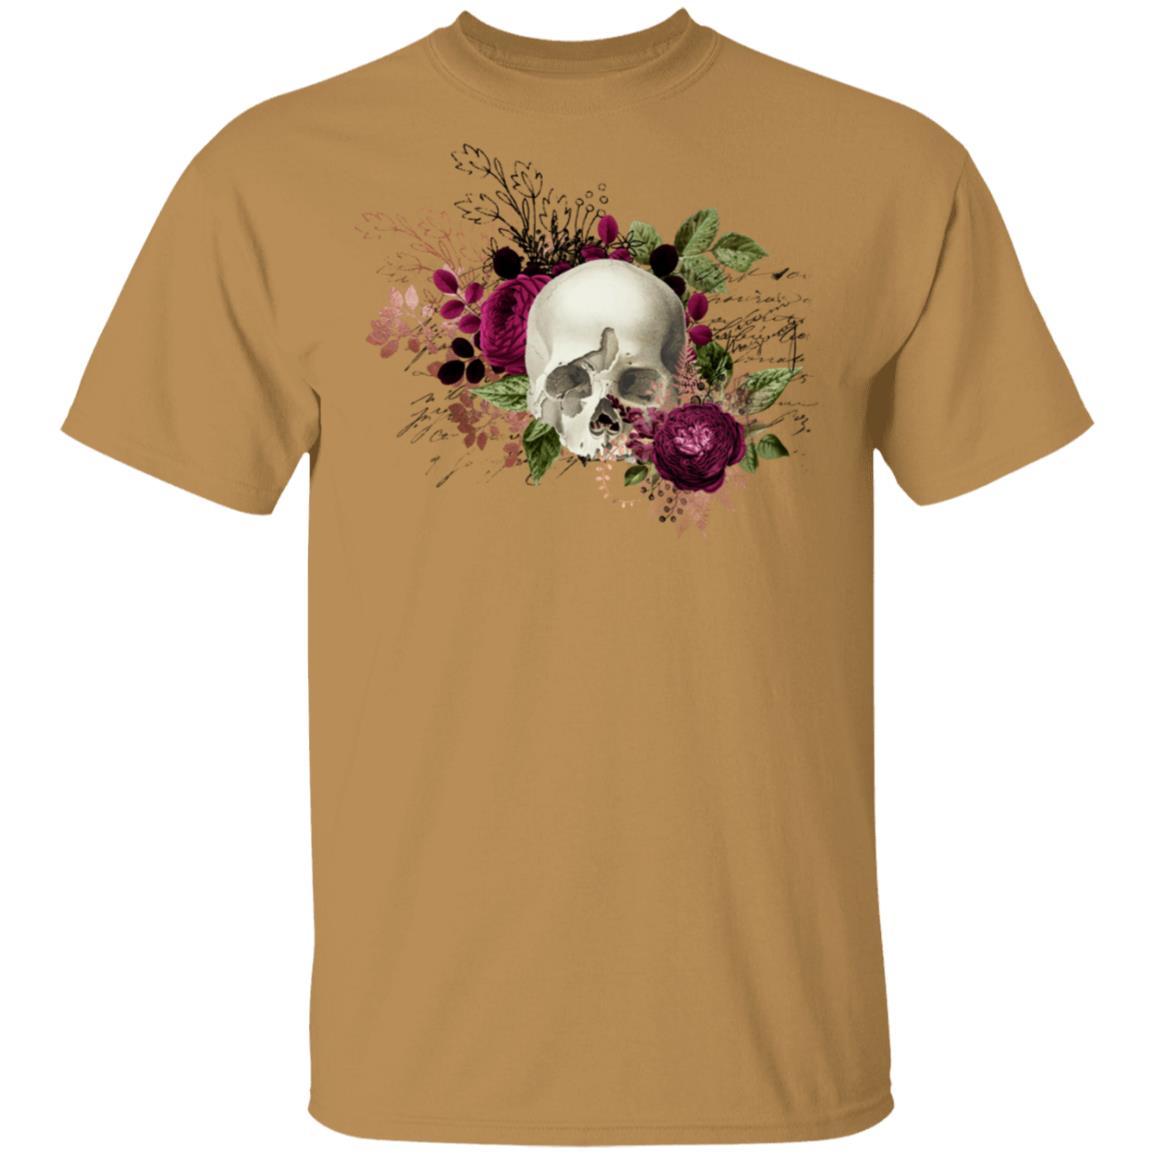 T-Shirts Old Gold / S Winey Bitches Co Skull Design #6 5.3 oz. T-Shirt WineyBitchesCo